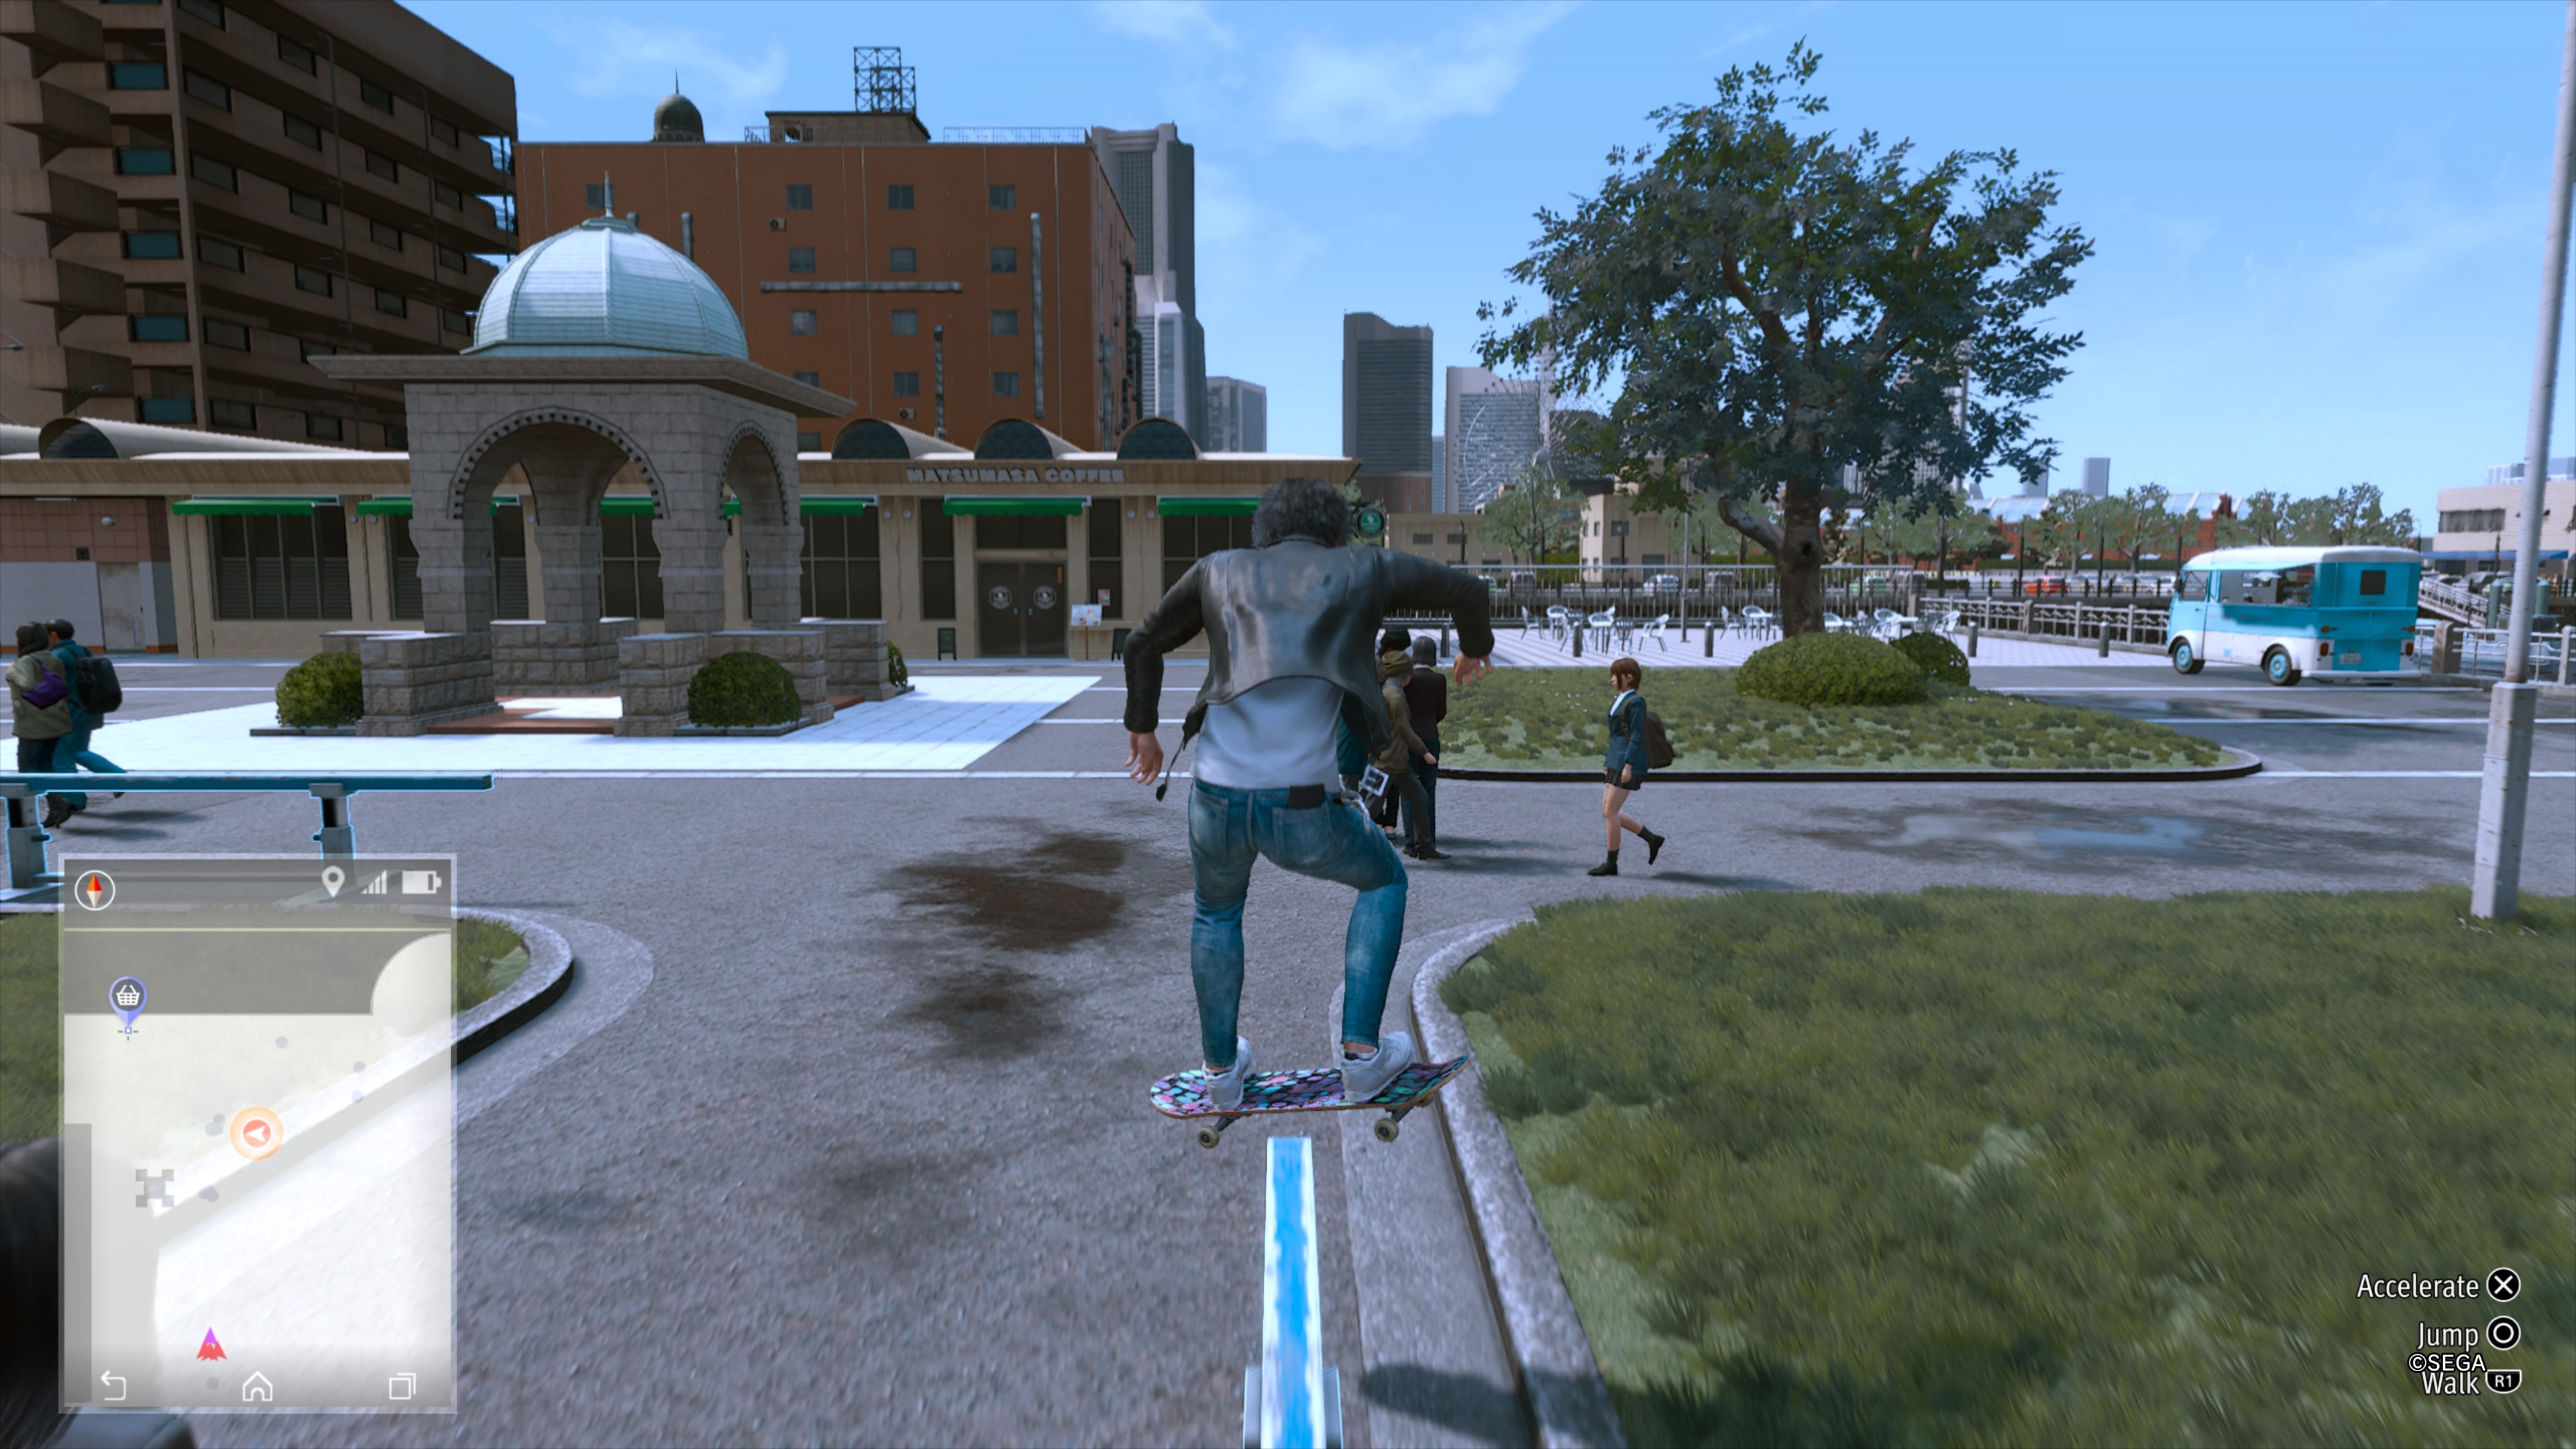 Doubling up as a means of getting around and being one of the club, the skateboard offers some levity to the main storyline